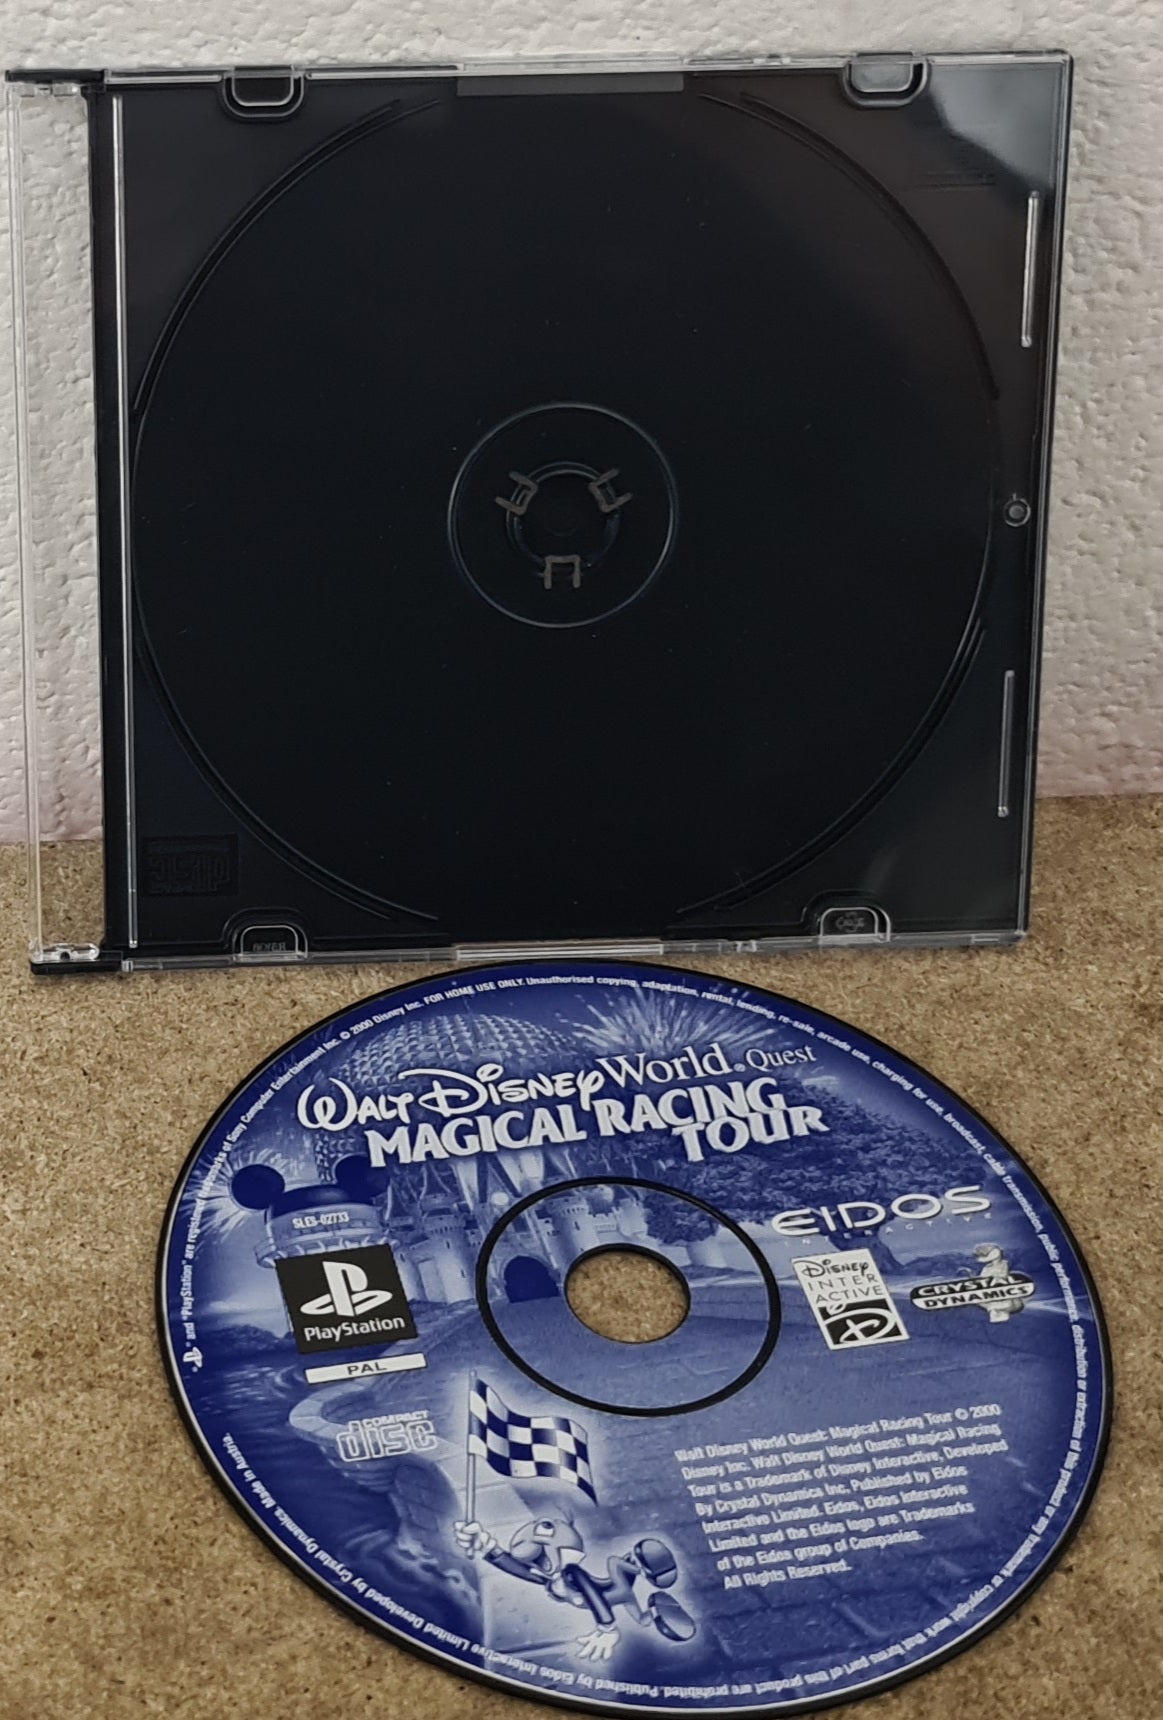 Walt Disney World Quest Magical Racing Tour Sony Playstation 1 (PS1) Game Disc Only